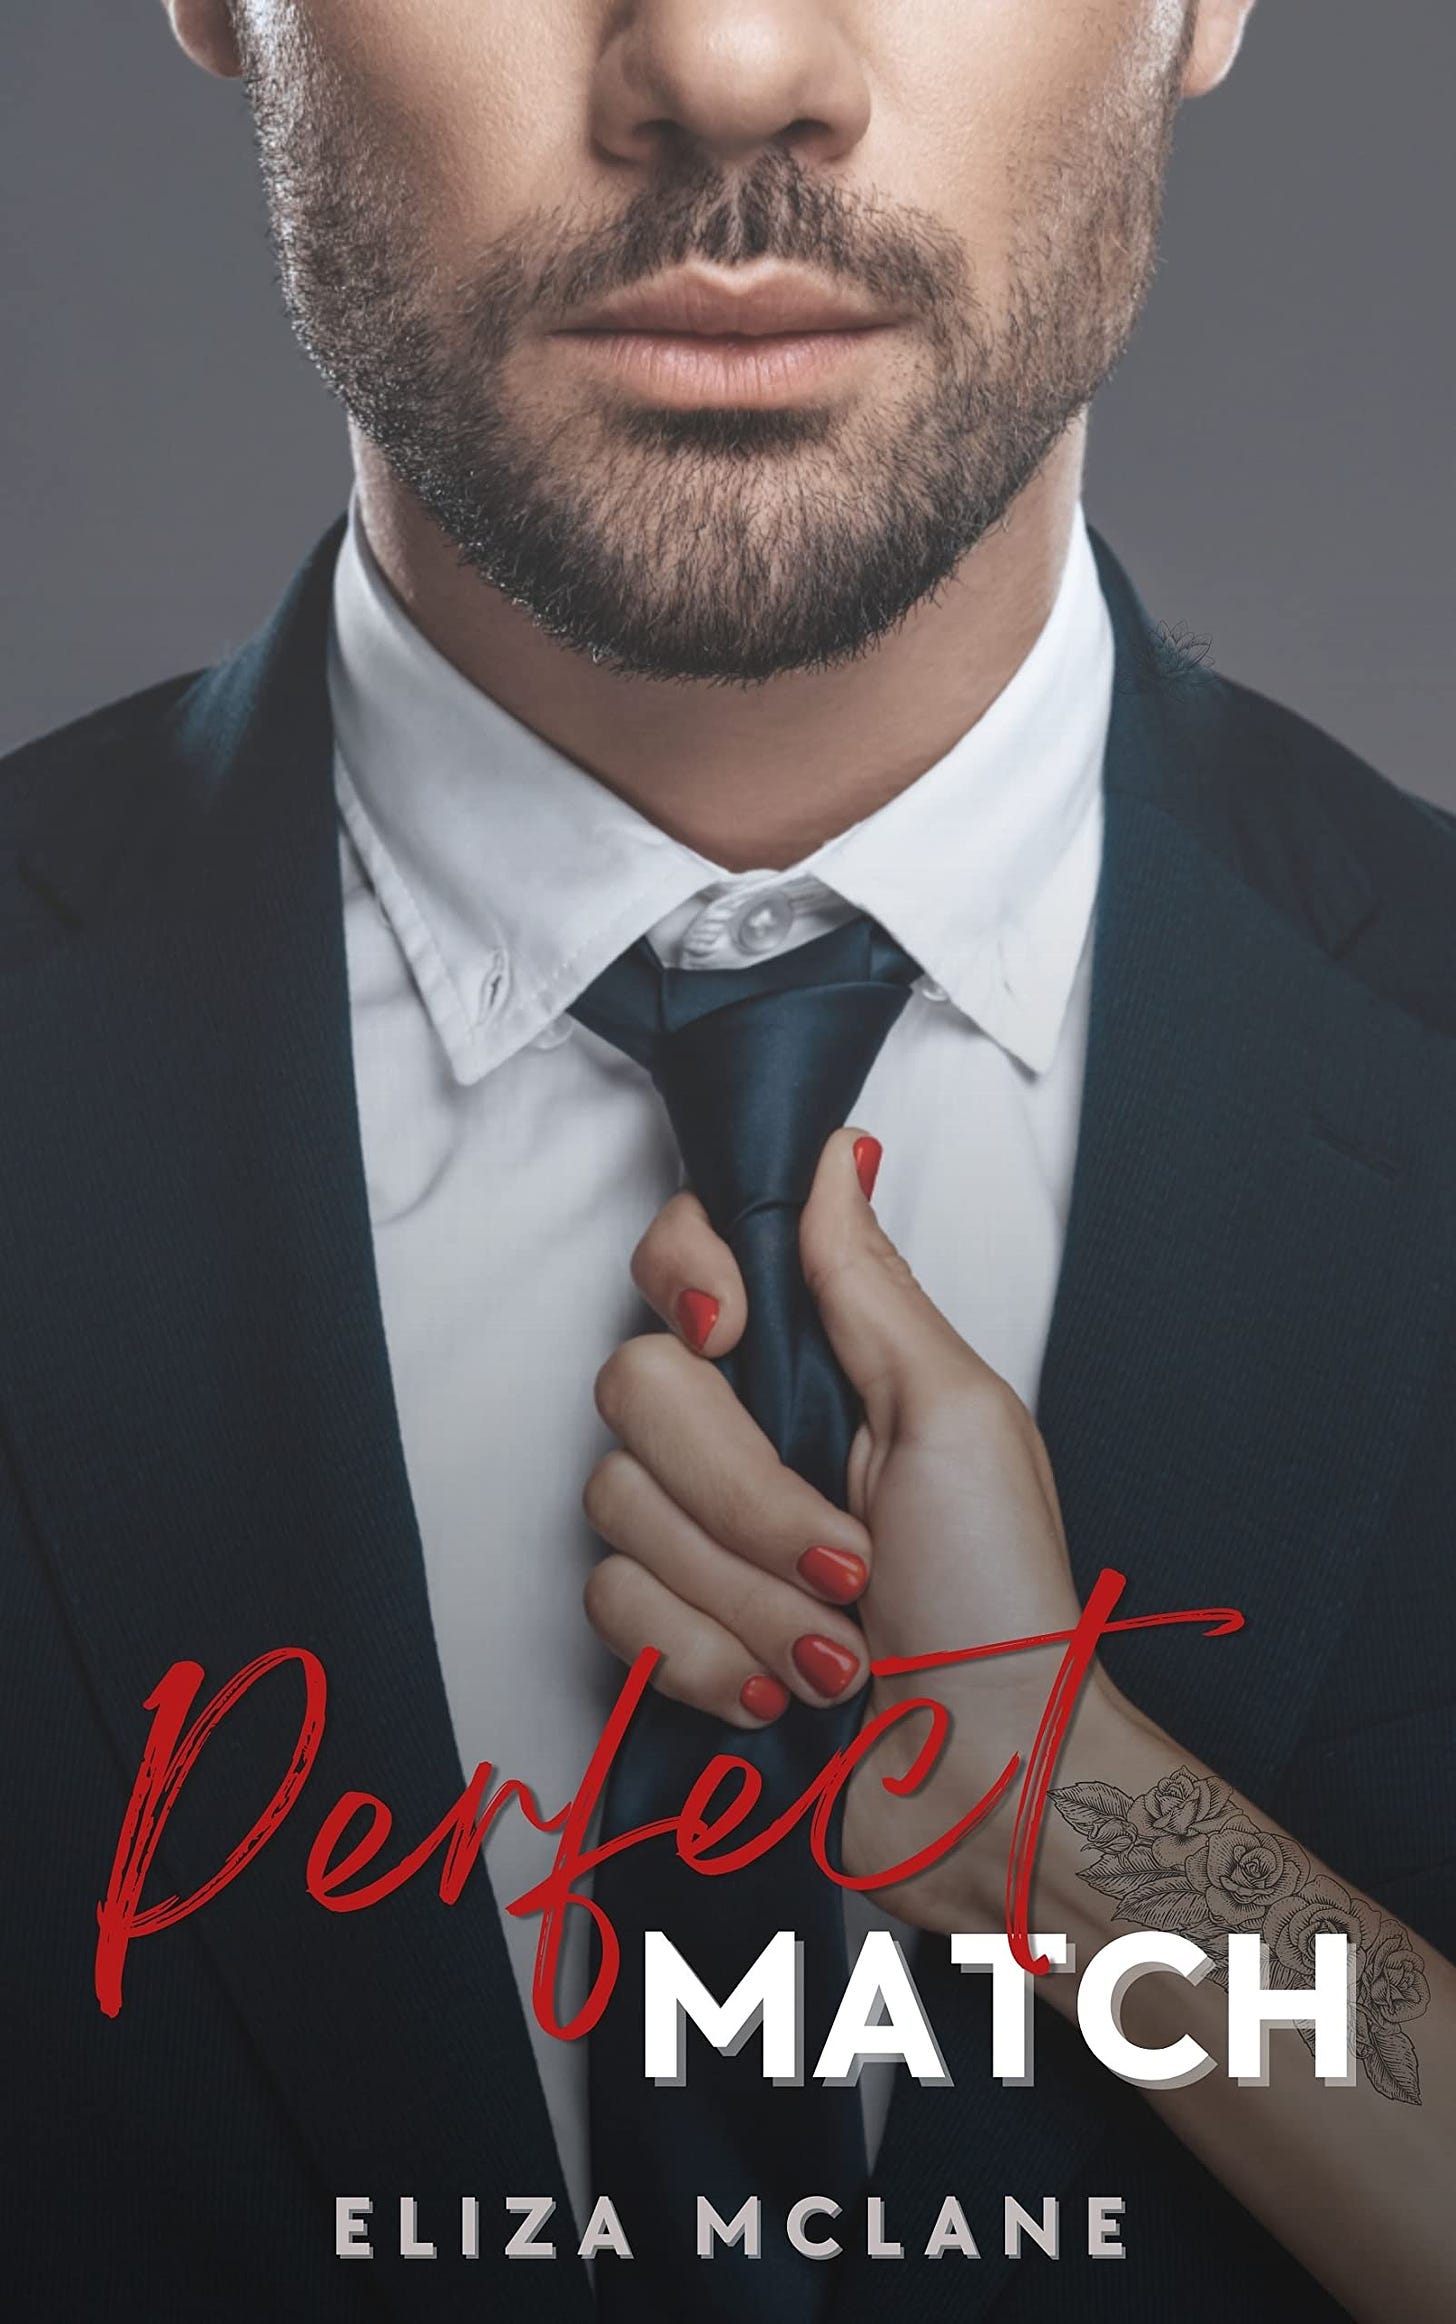 Eliza Mclane's book Perfect Match. A white man in a suit, with a white woman's hand grabbing his tie.